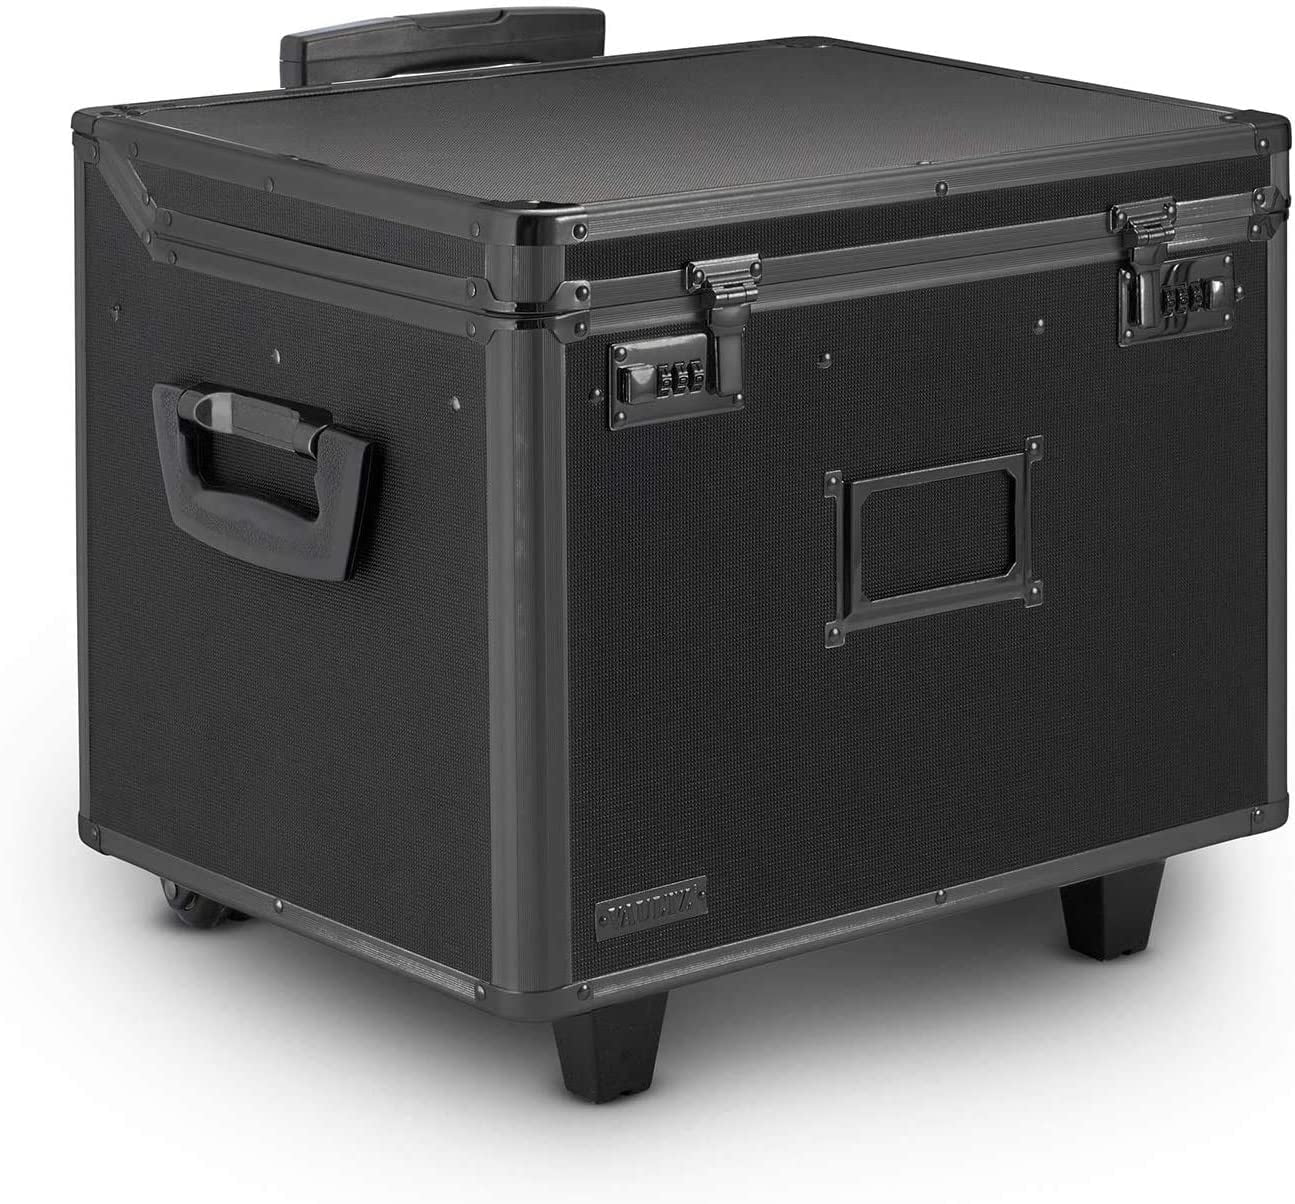 Universal Collapsible Mobile Storage Crate Unv14110 for sale online 